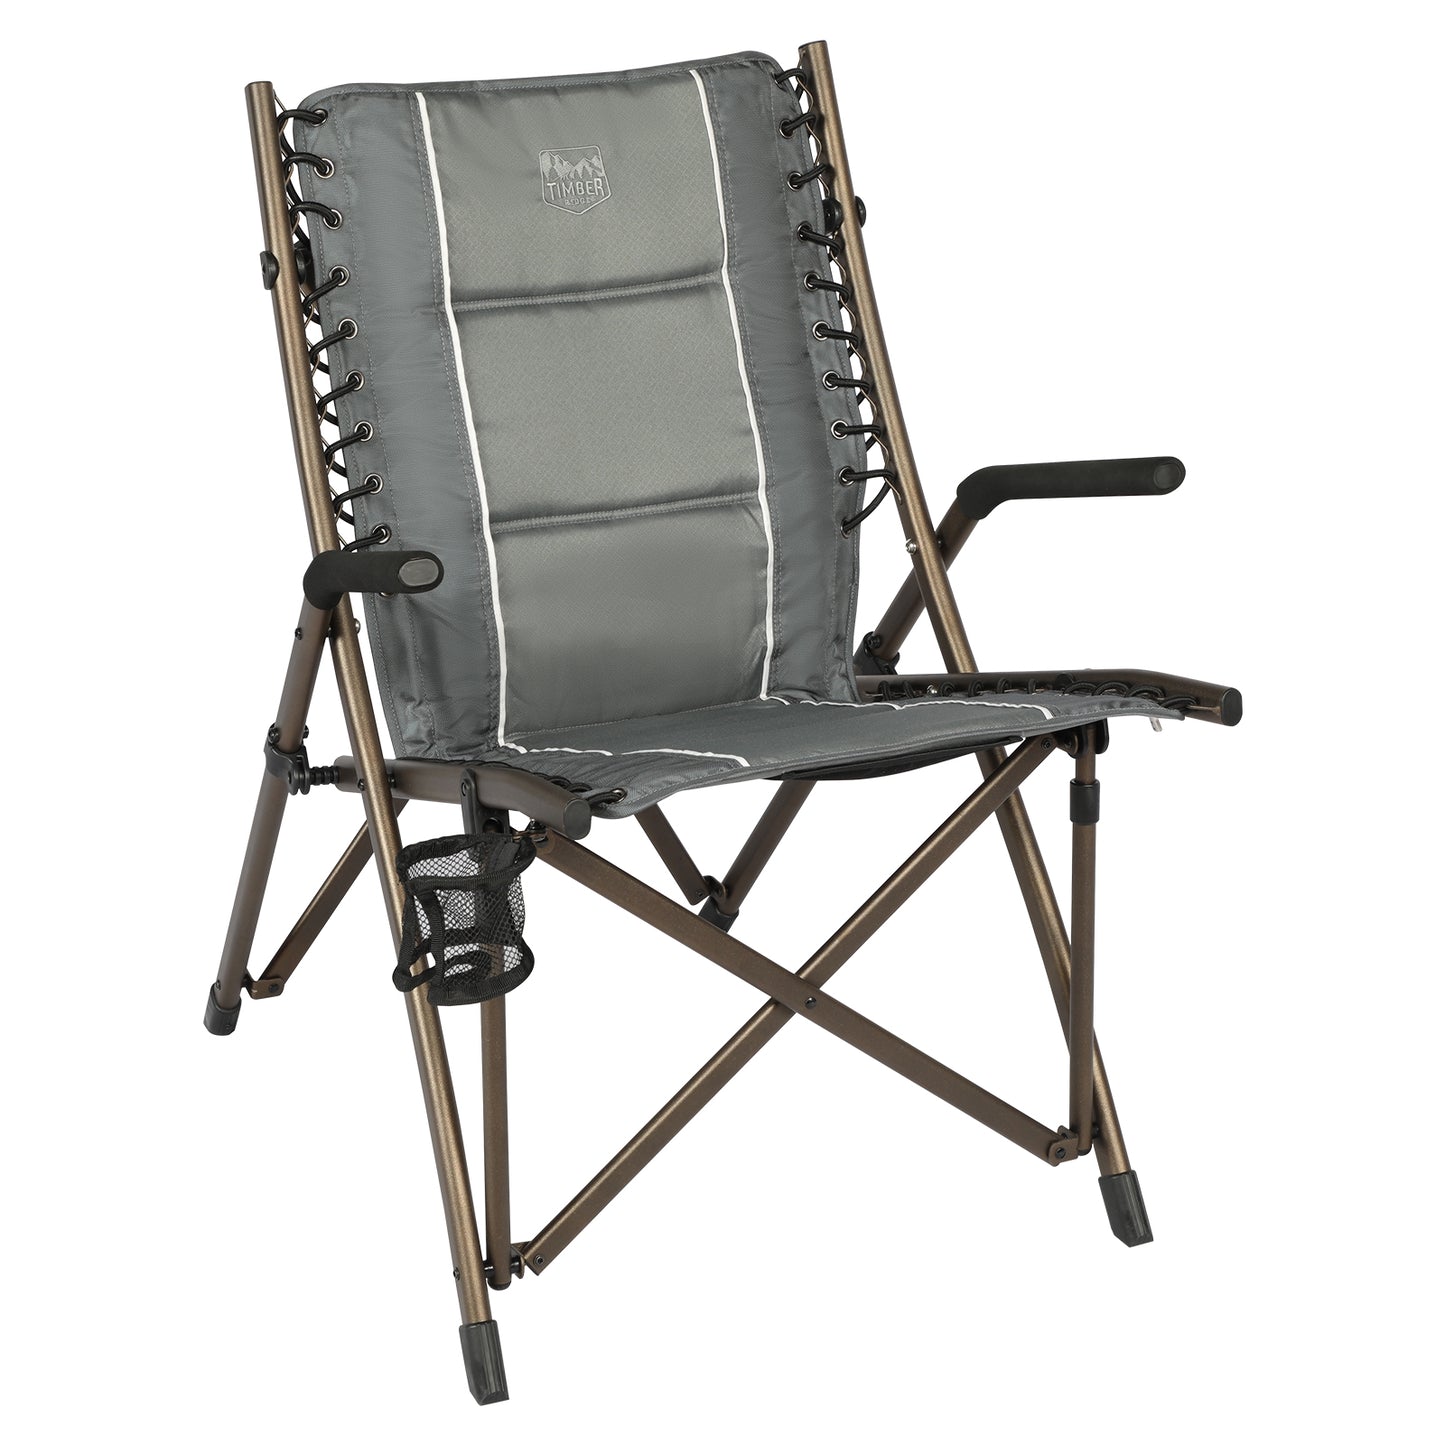 Timber Ridge® Fraser Deluxe Bungee Chair, Gray